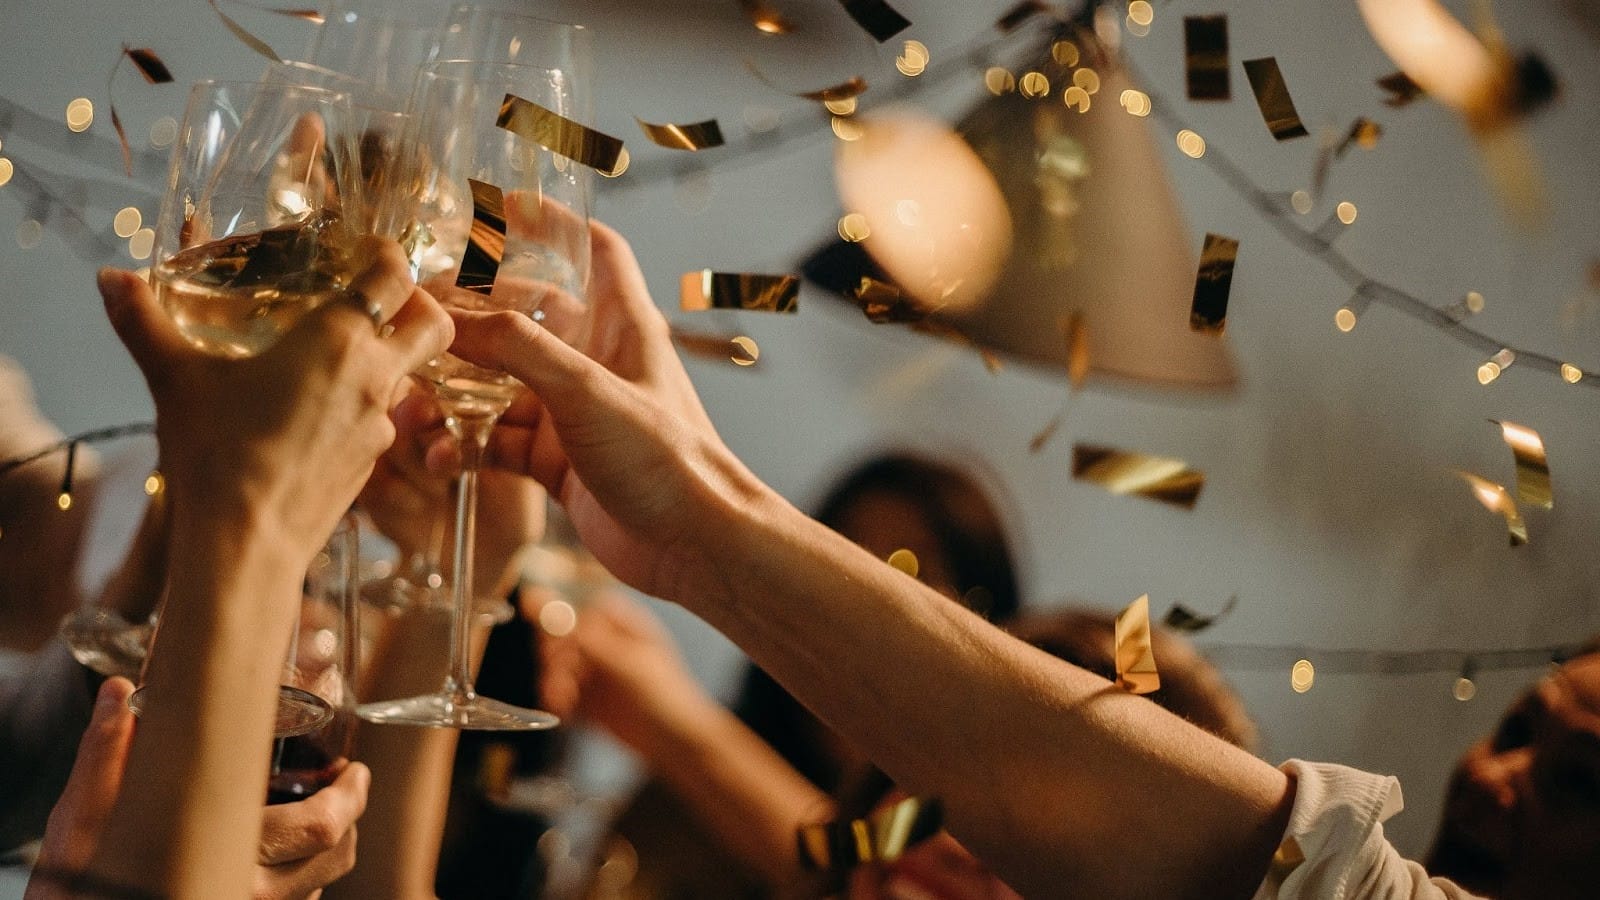 A New Year's Eve champagne toast.